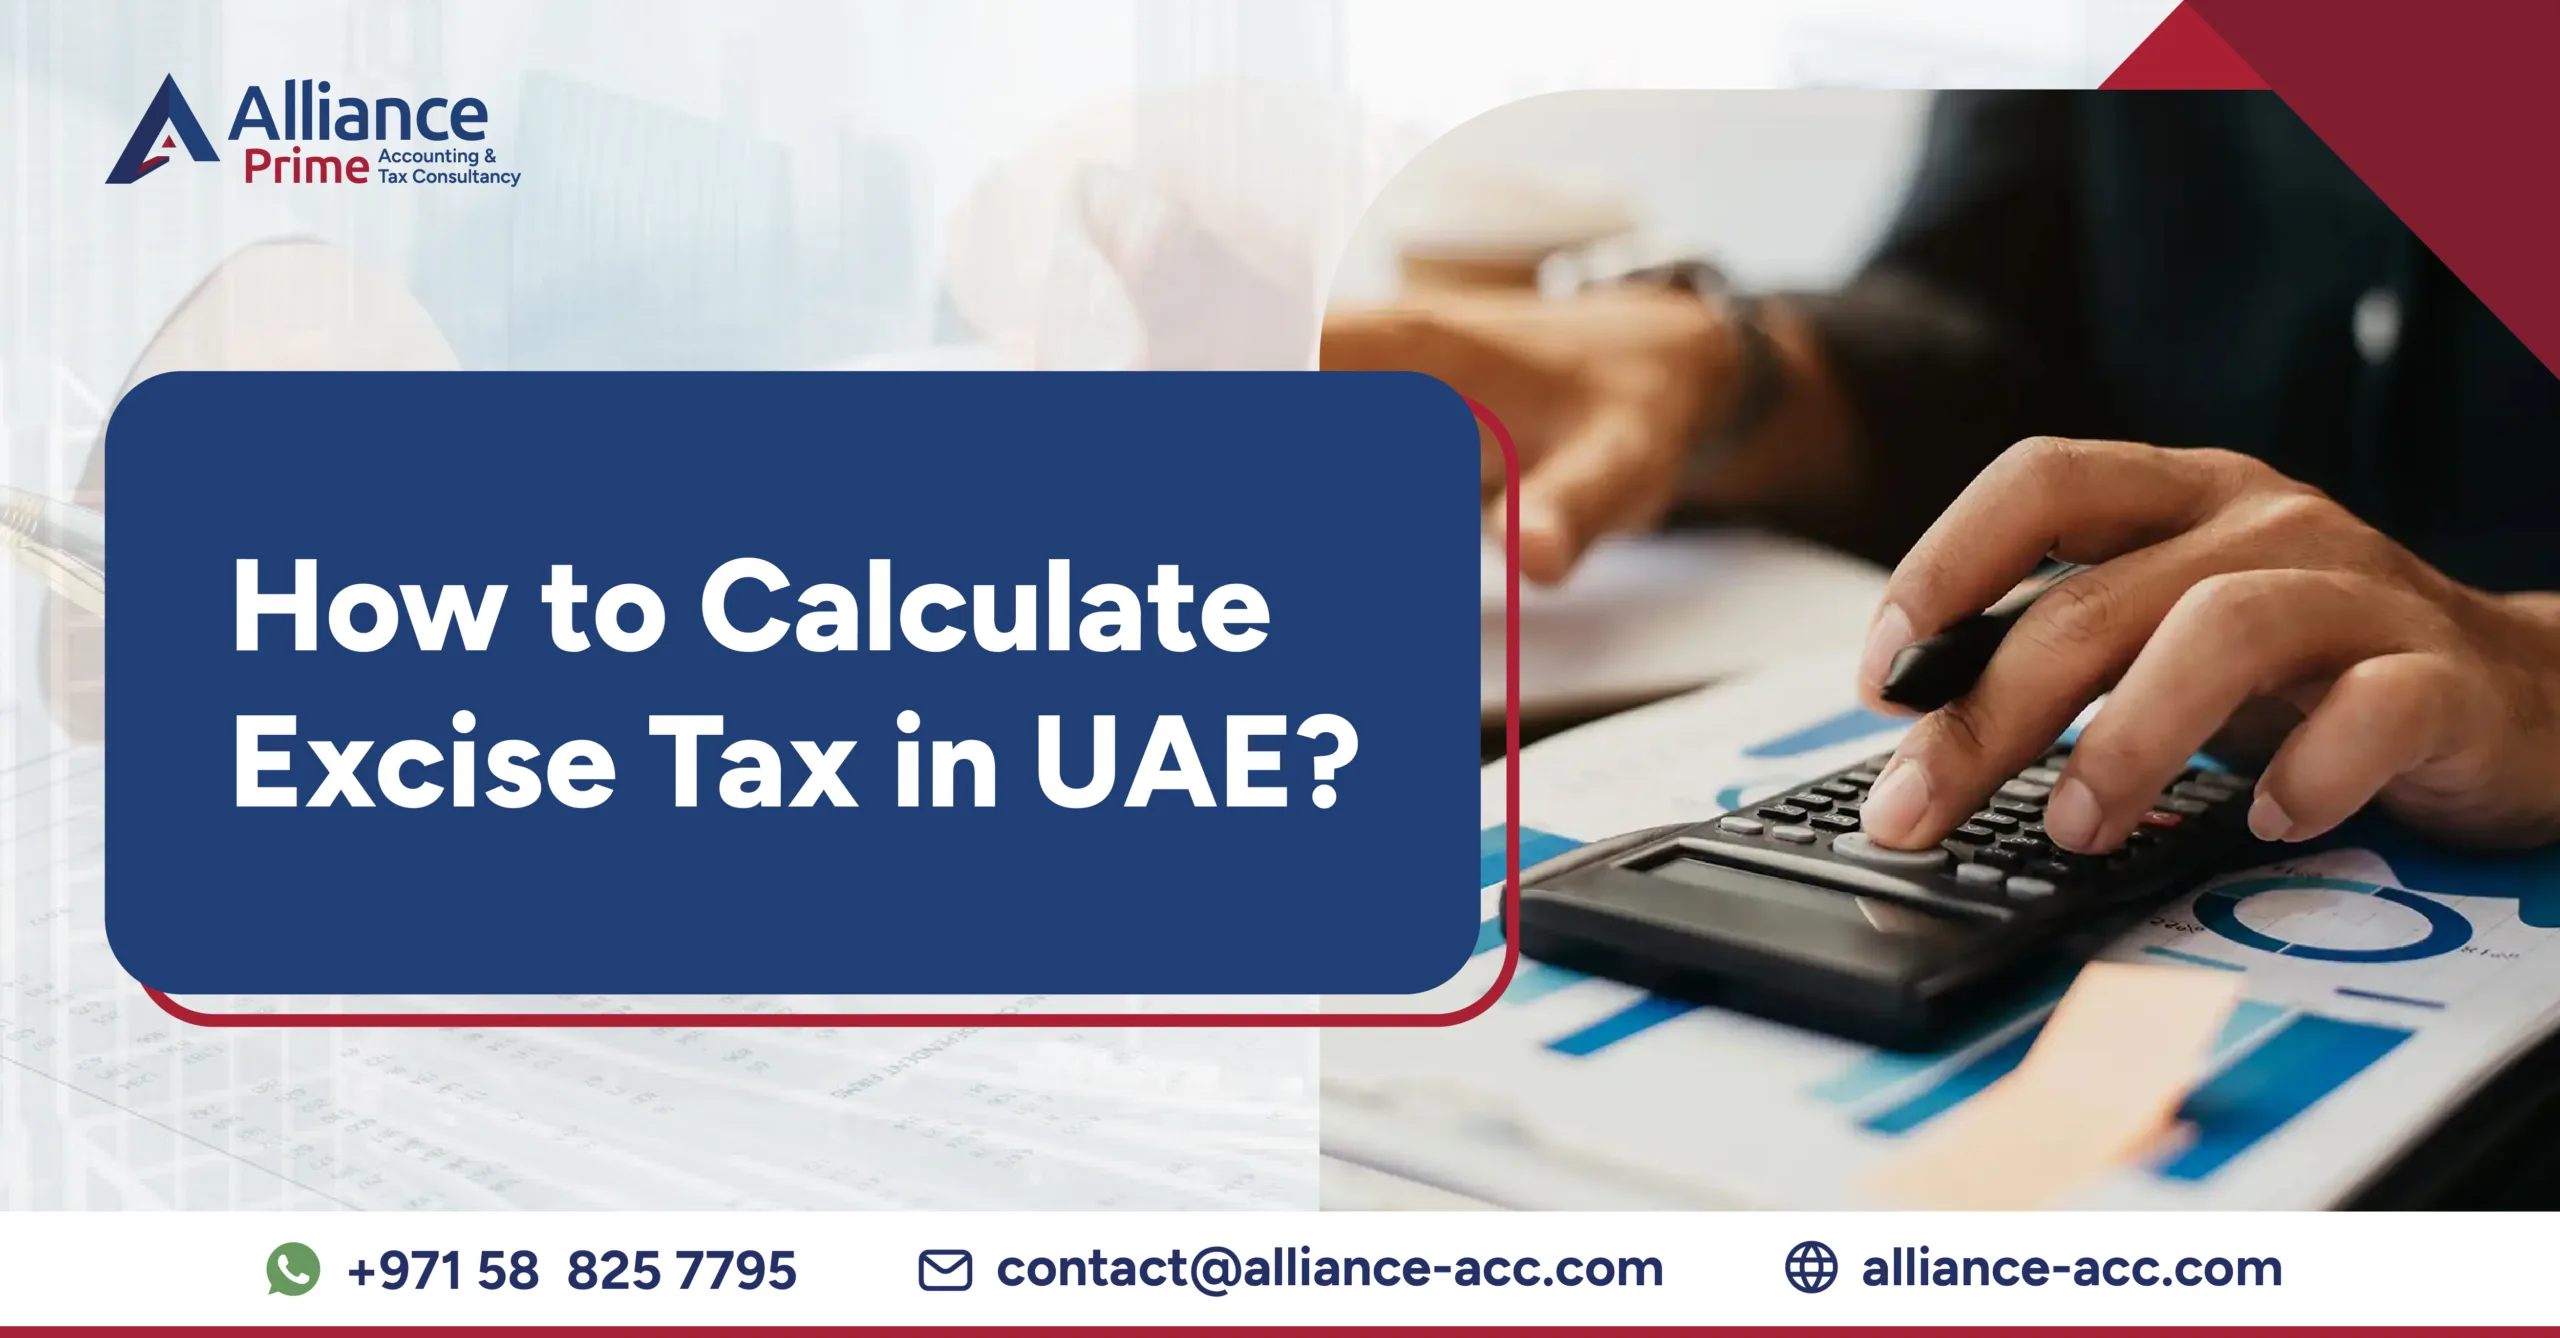 Calculate Excise Tax in UAE